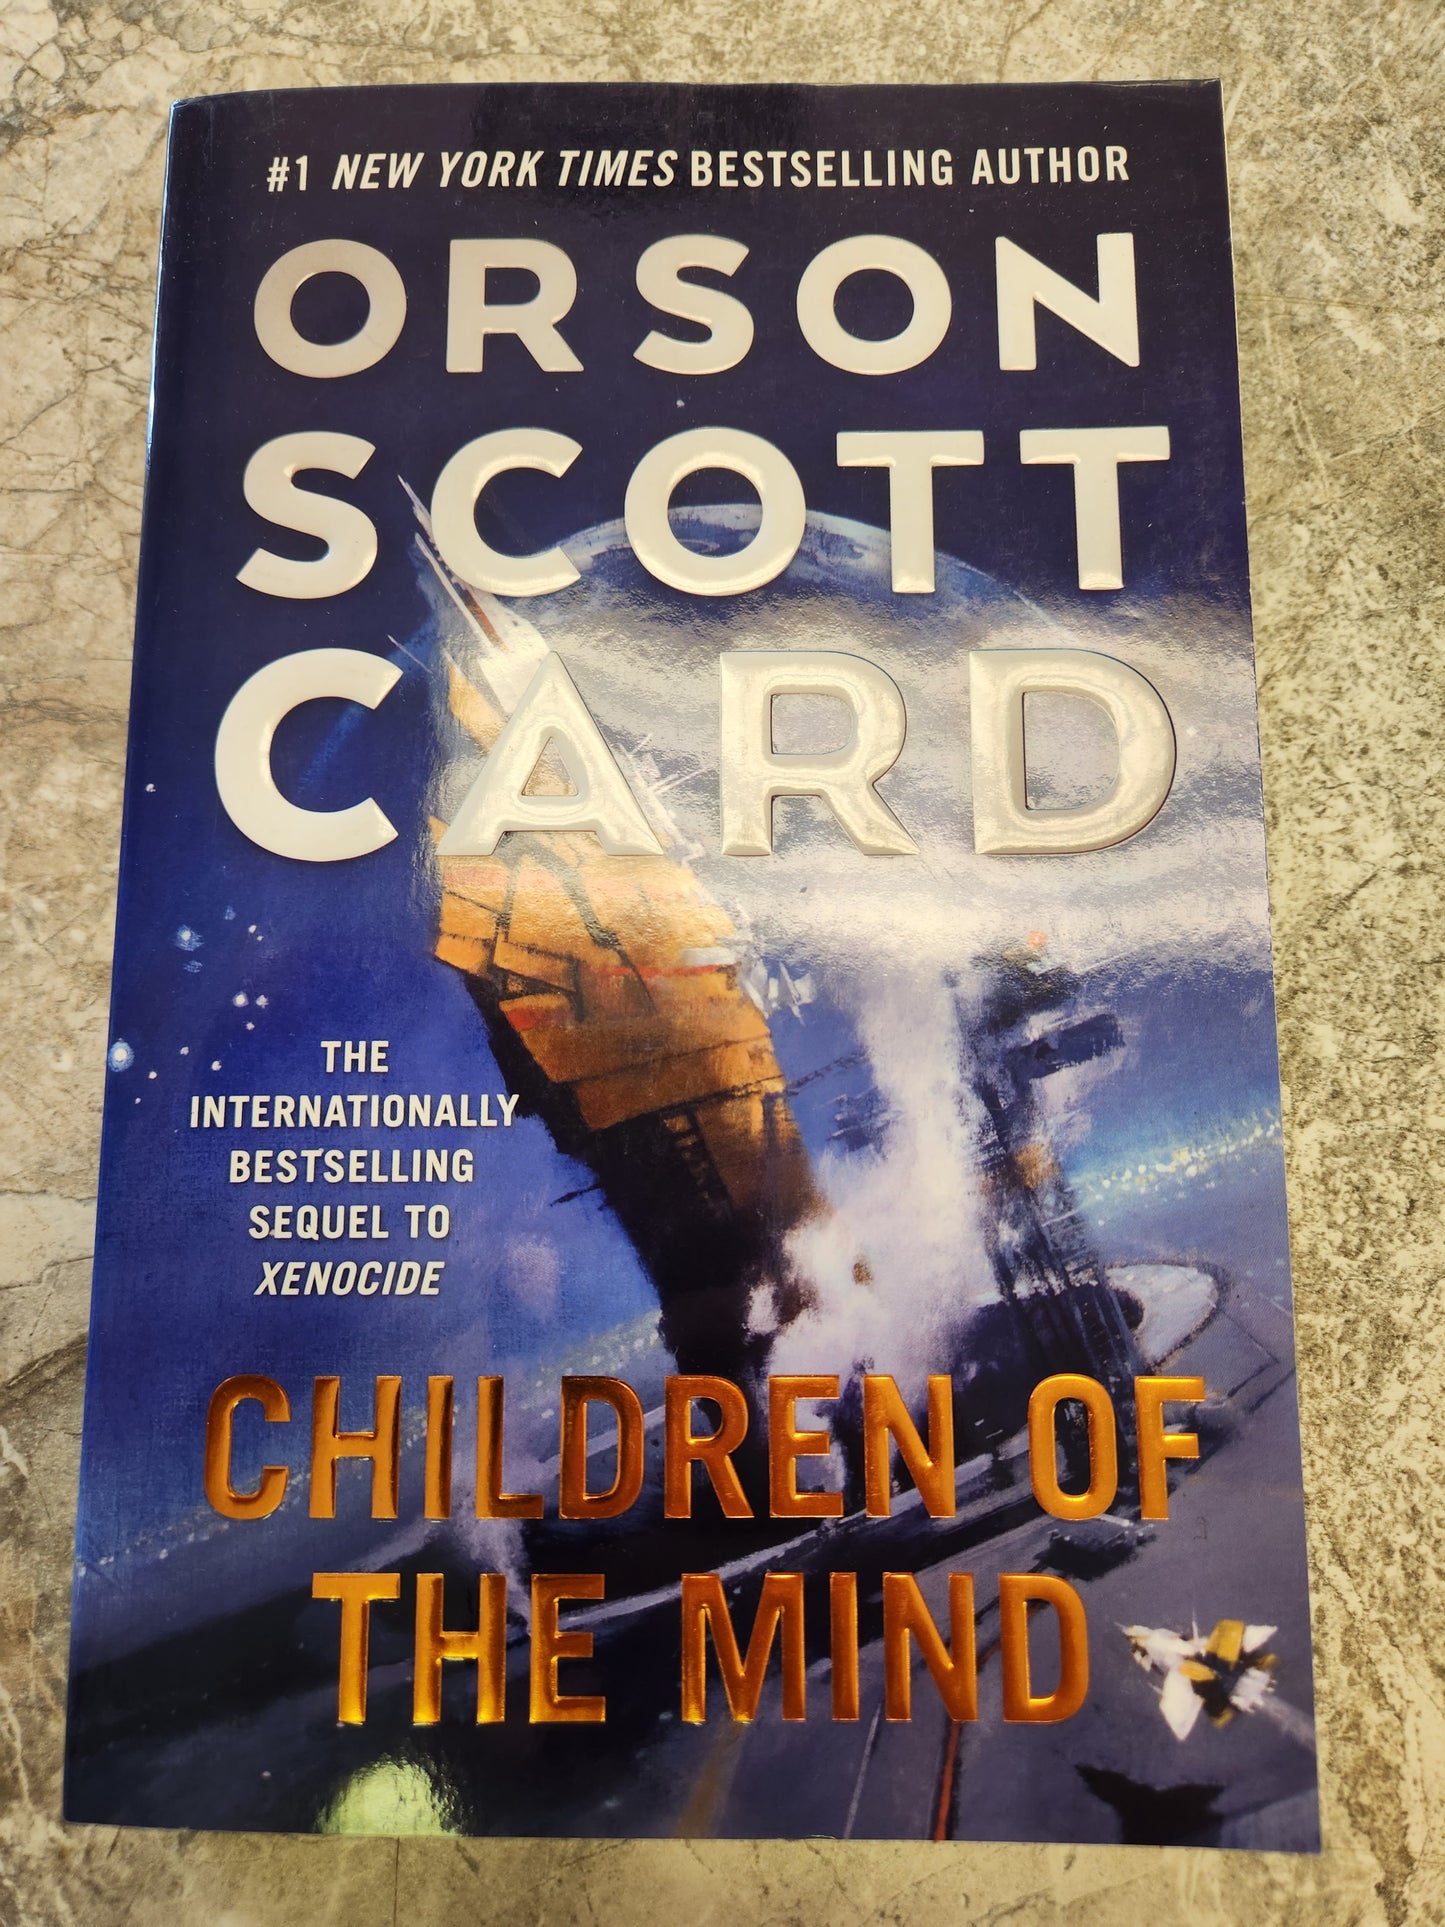 "Children of the Mind" by Orson Scott Card - Dead Tree Dreams Books